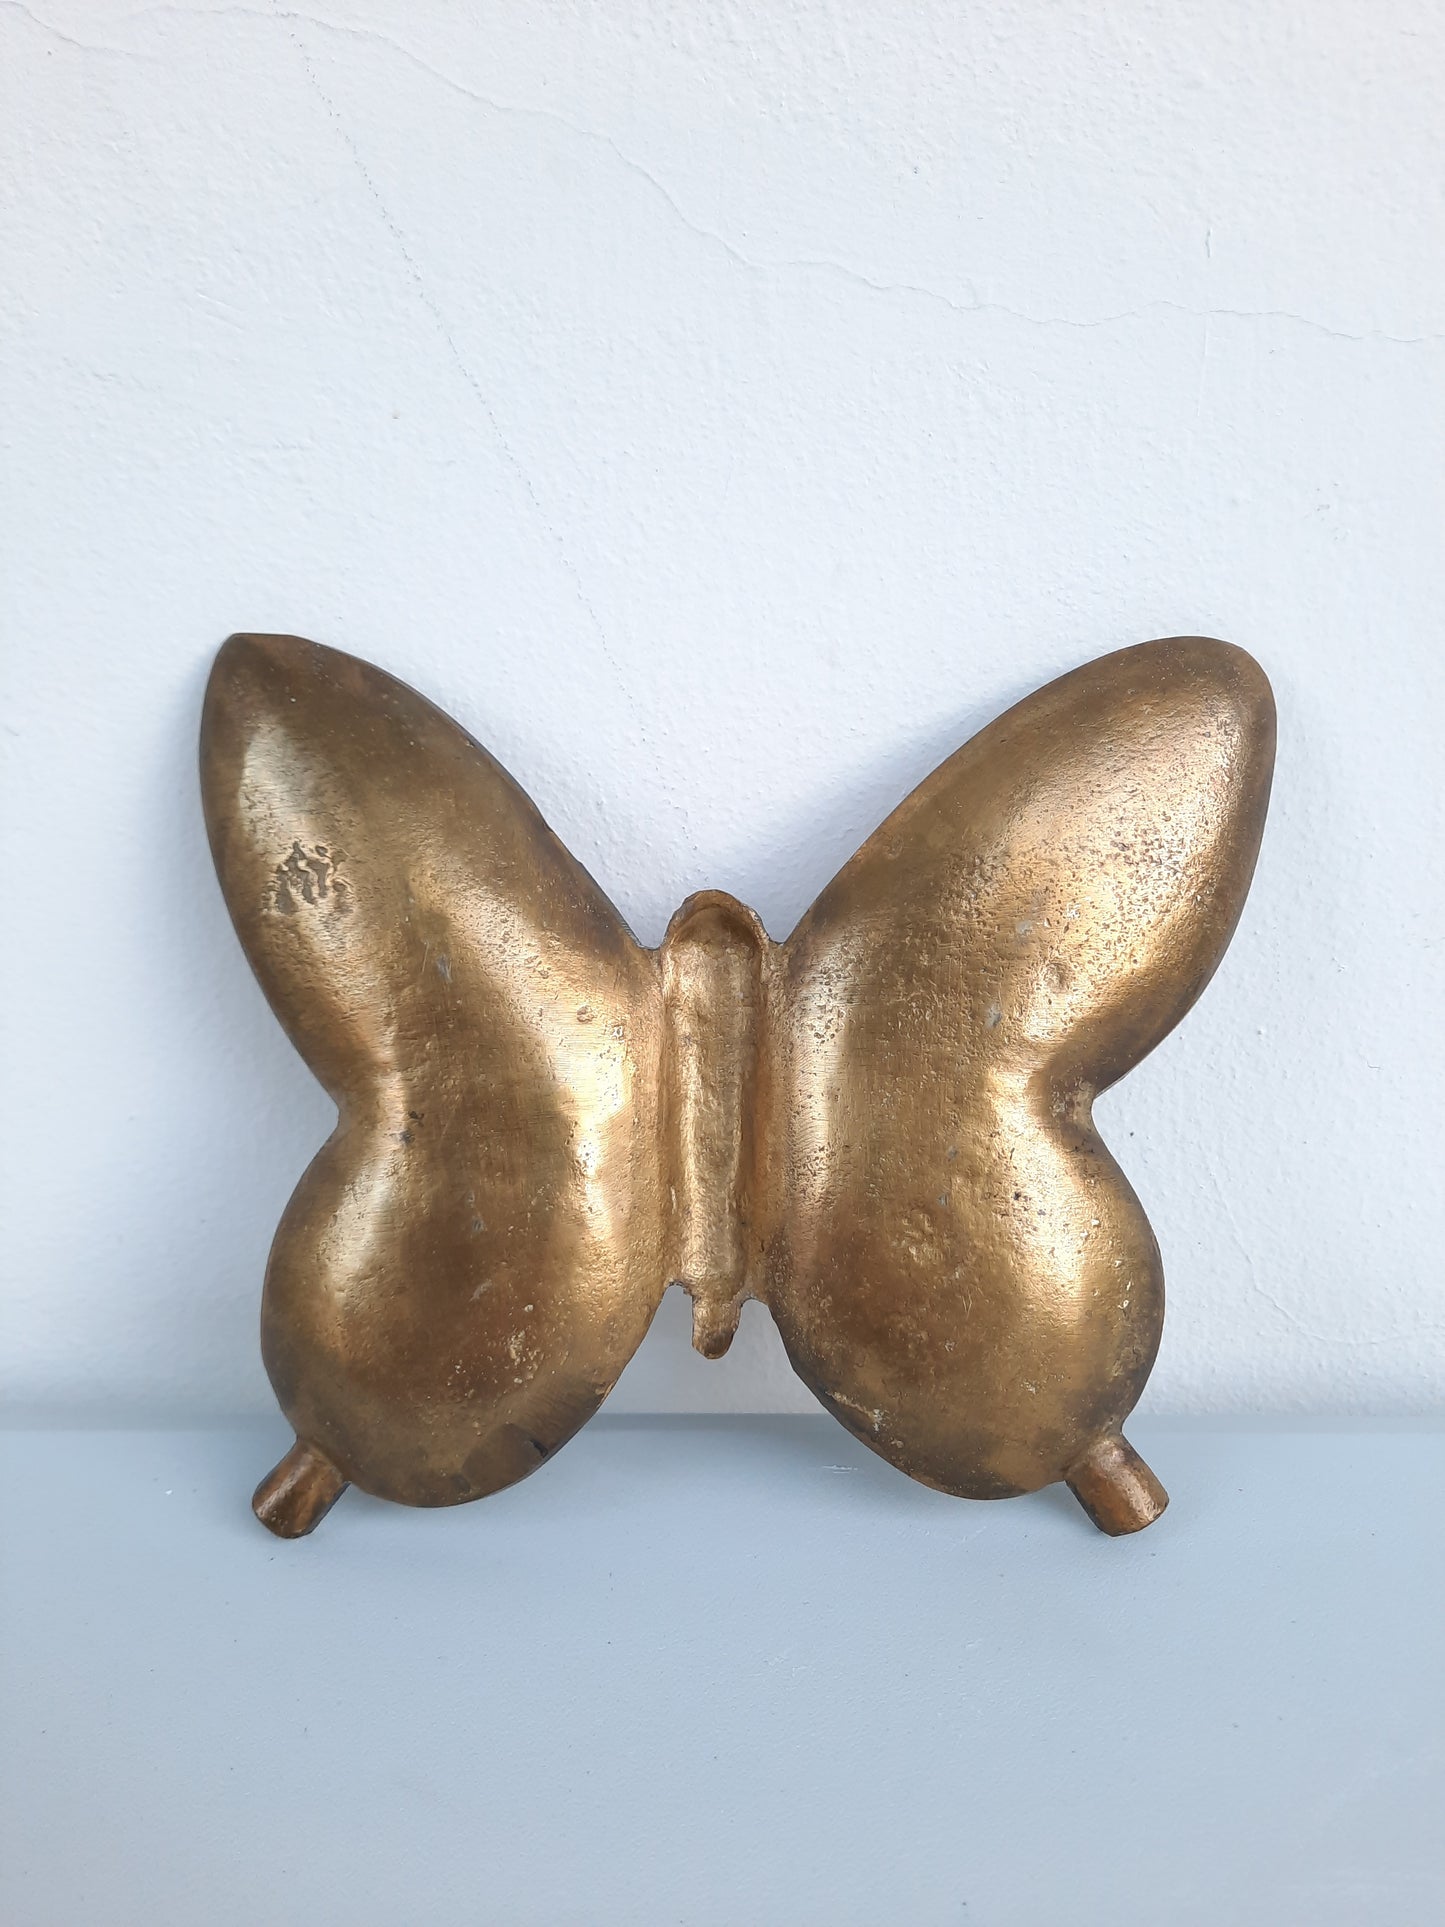 Vintage Embossed Brass Butterfly Ashtray